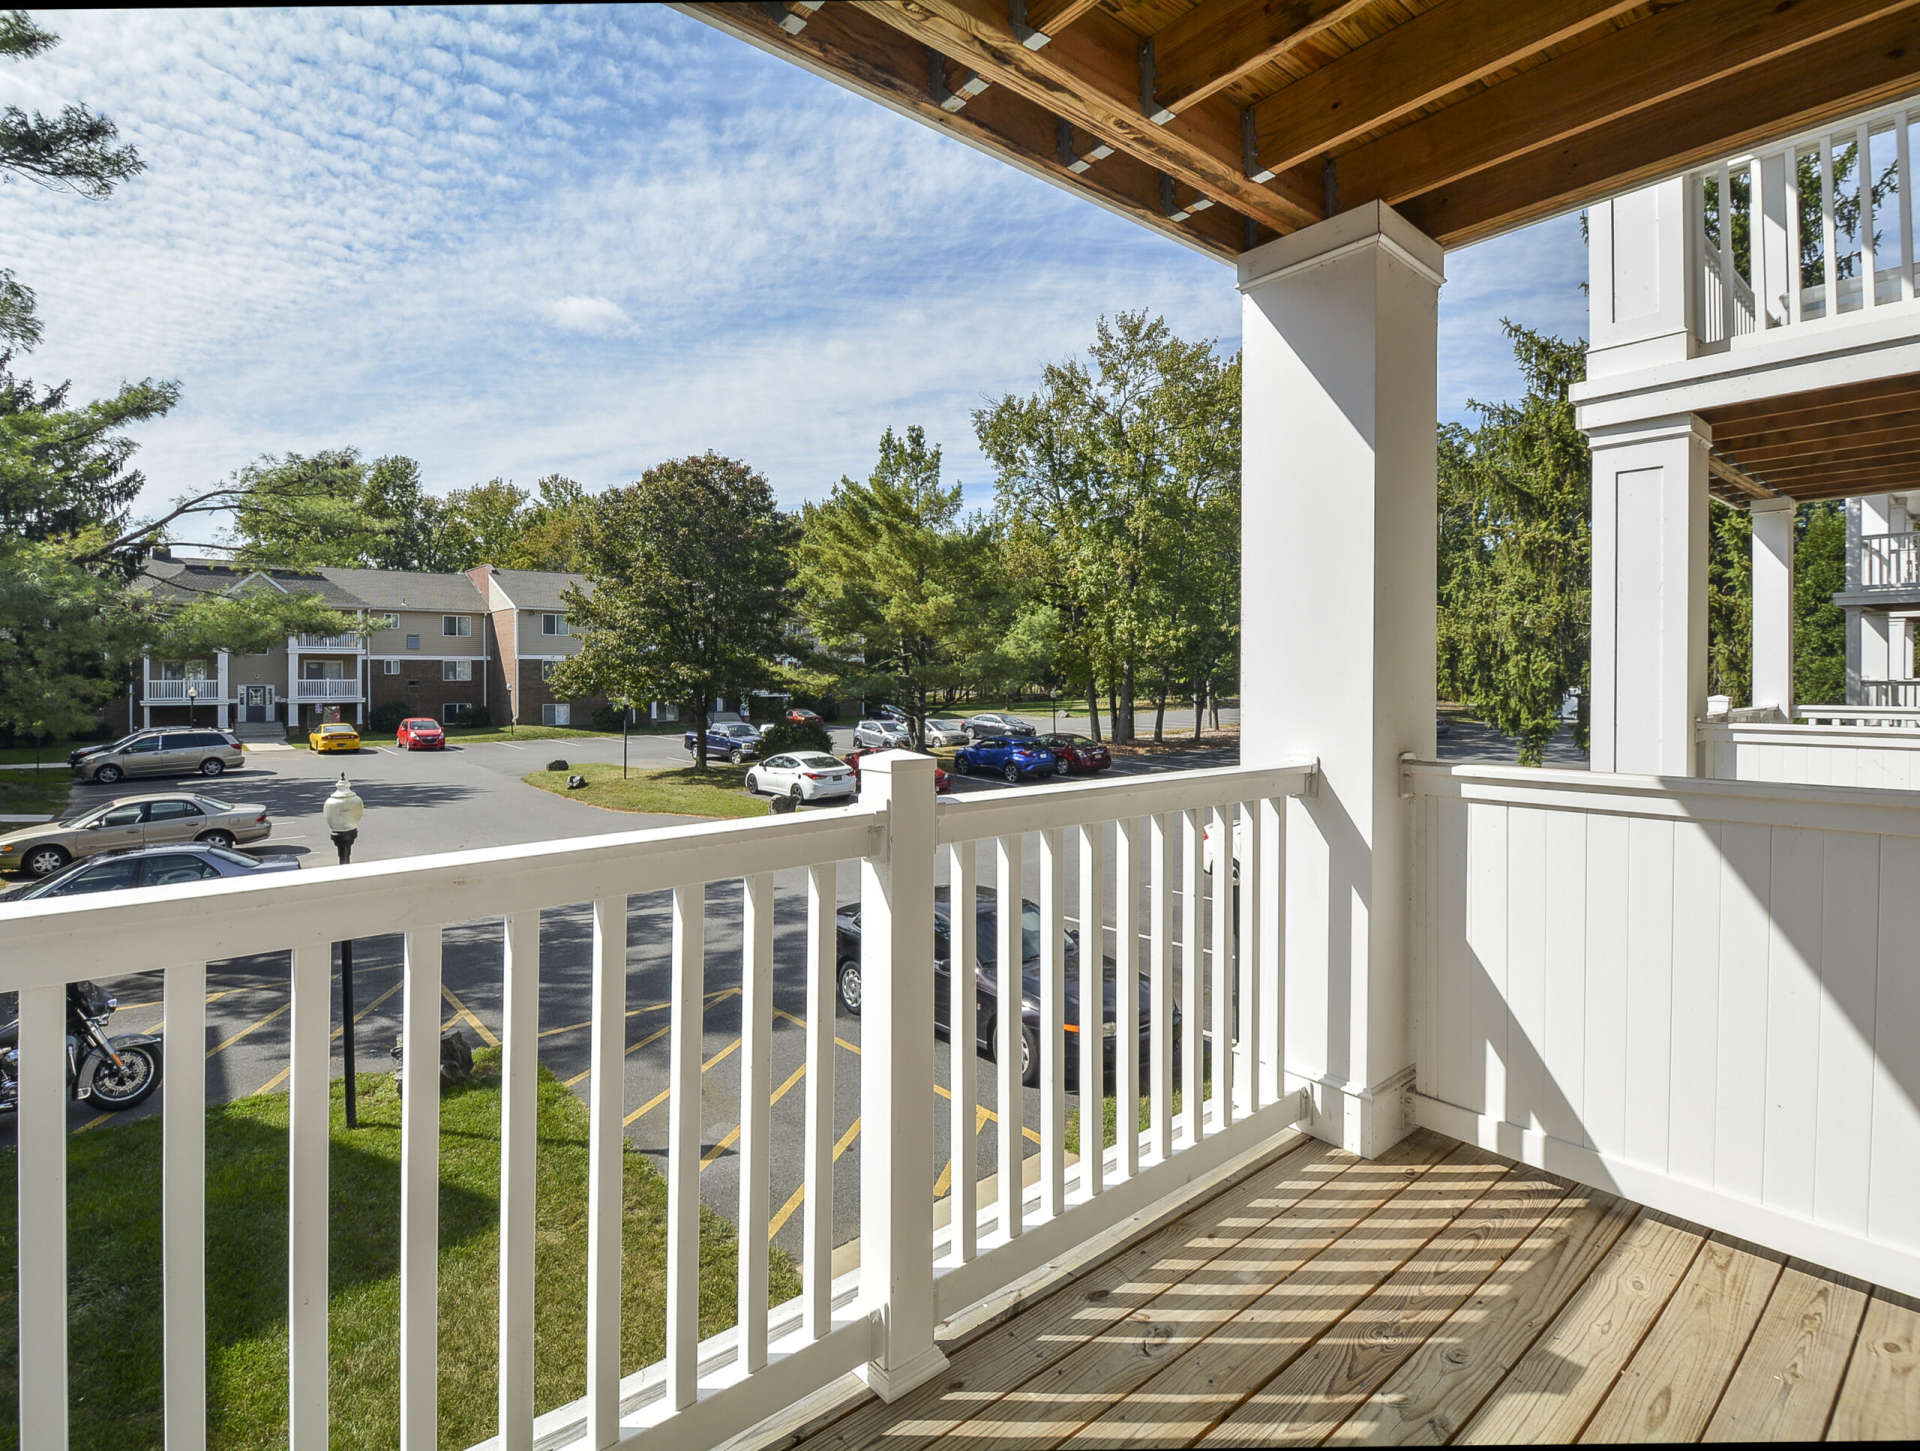 Apartment balcony with a view of the parking lot at Glen Eagle Village.